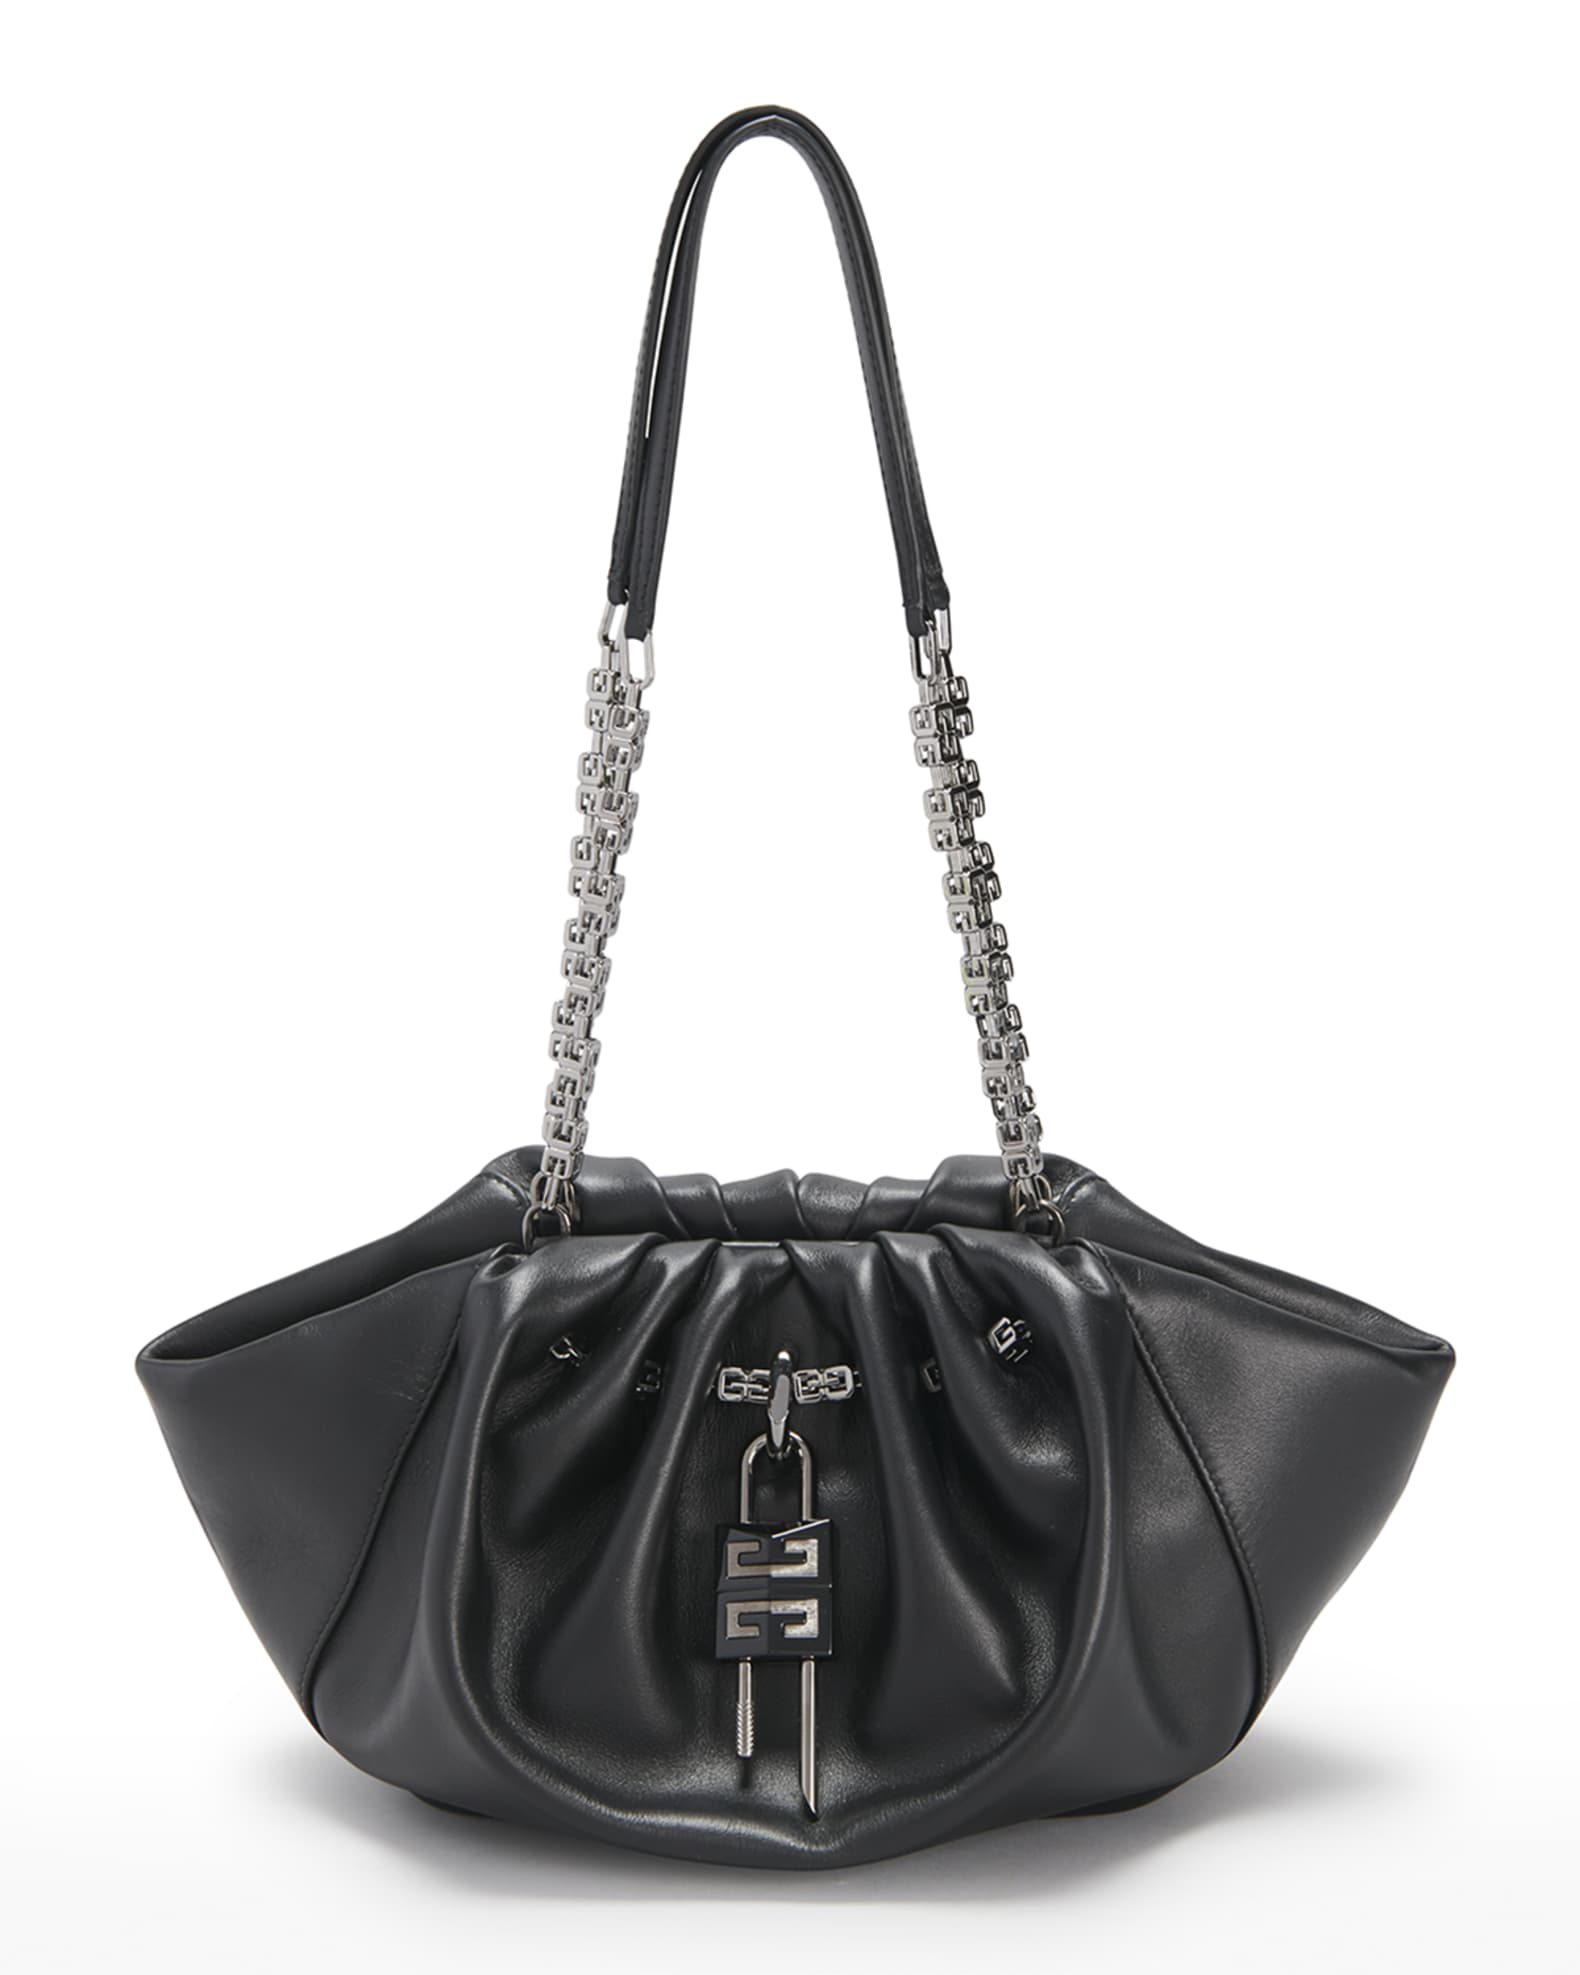 Givenchy Small Kenny Shoulder Bag in Pleated Calf Leather | Neiman Marcus